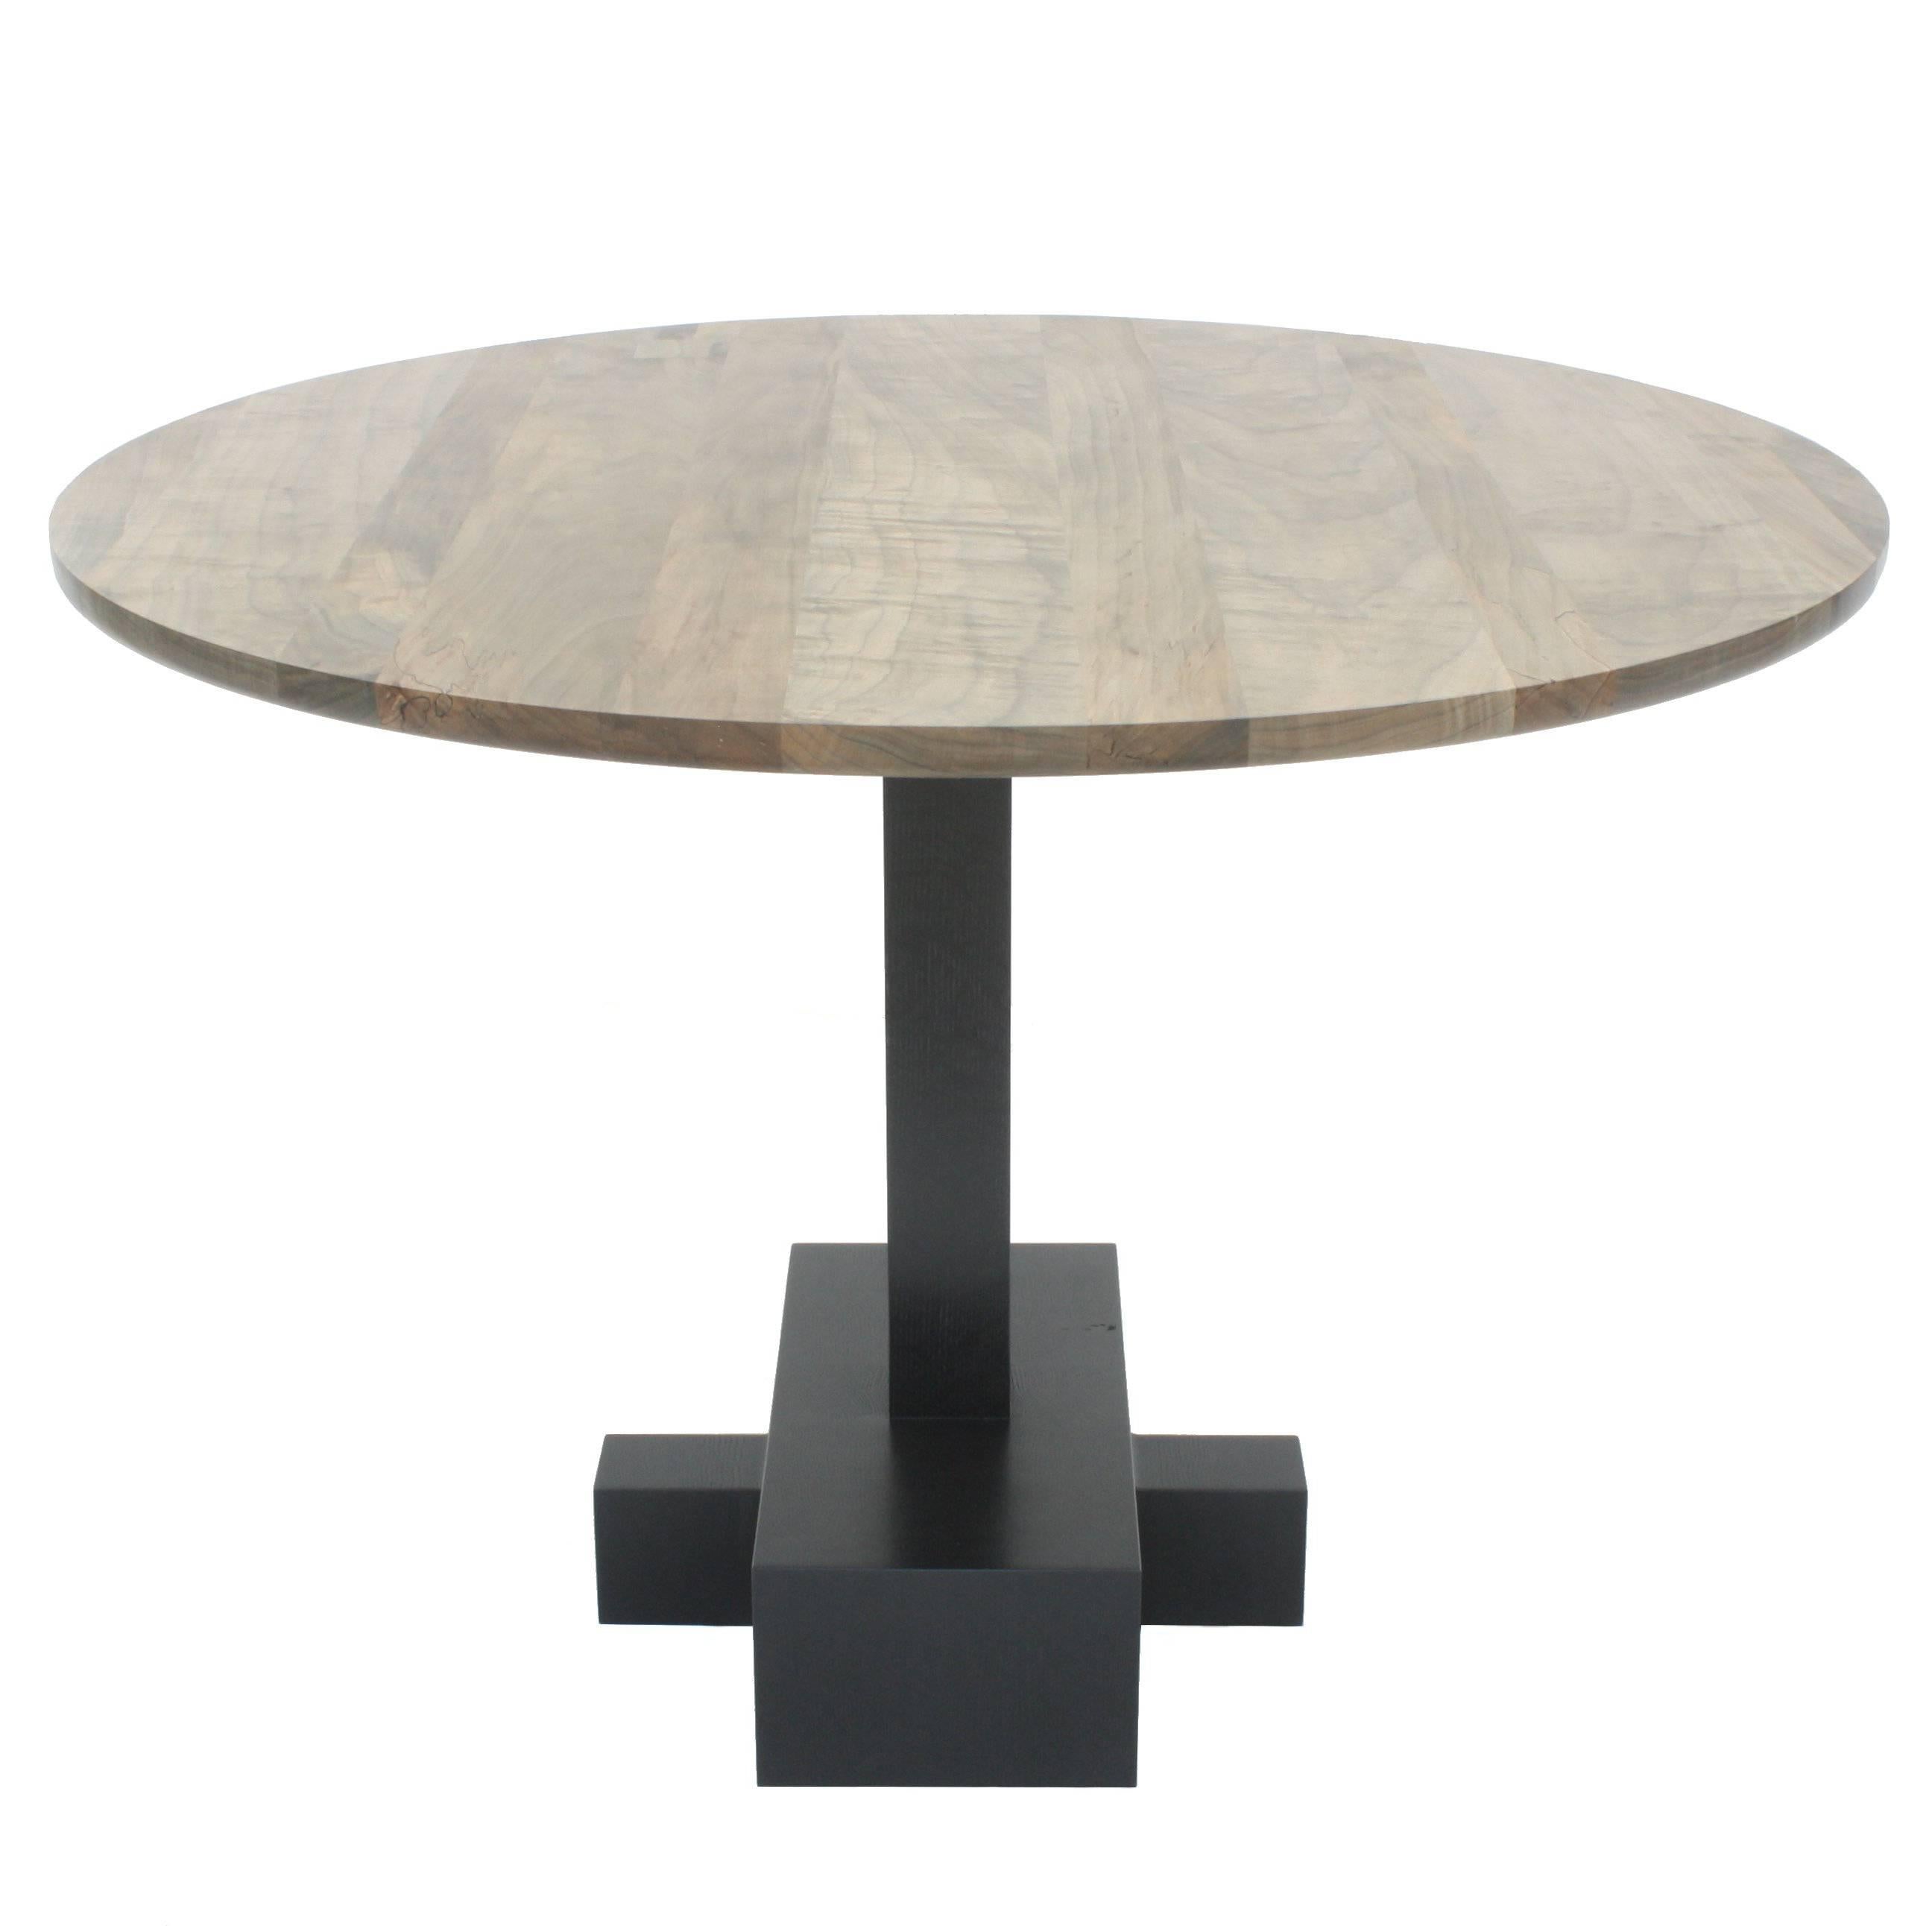 Juno, Handmade Wood Dining Table For Sale